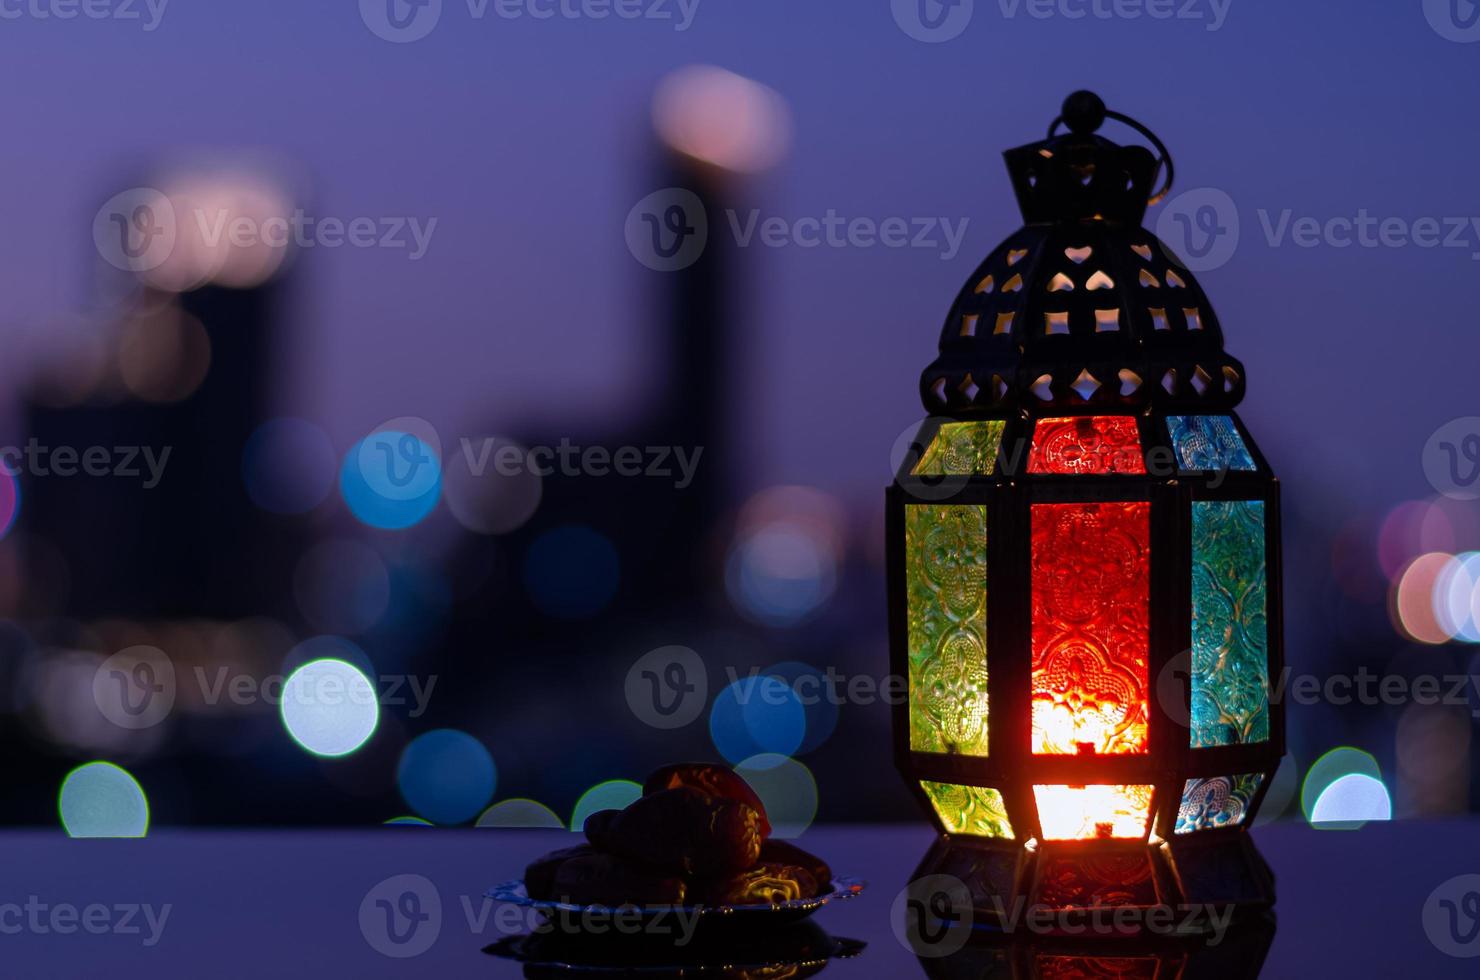 Lantern and small plate of dates fruit with night sky and city bokeh light background for the Muslim feast of the holy month of Ramadan Kareem. photo